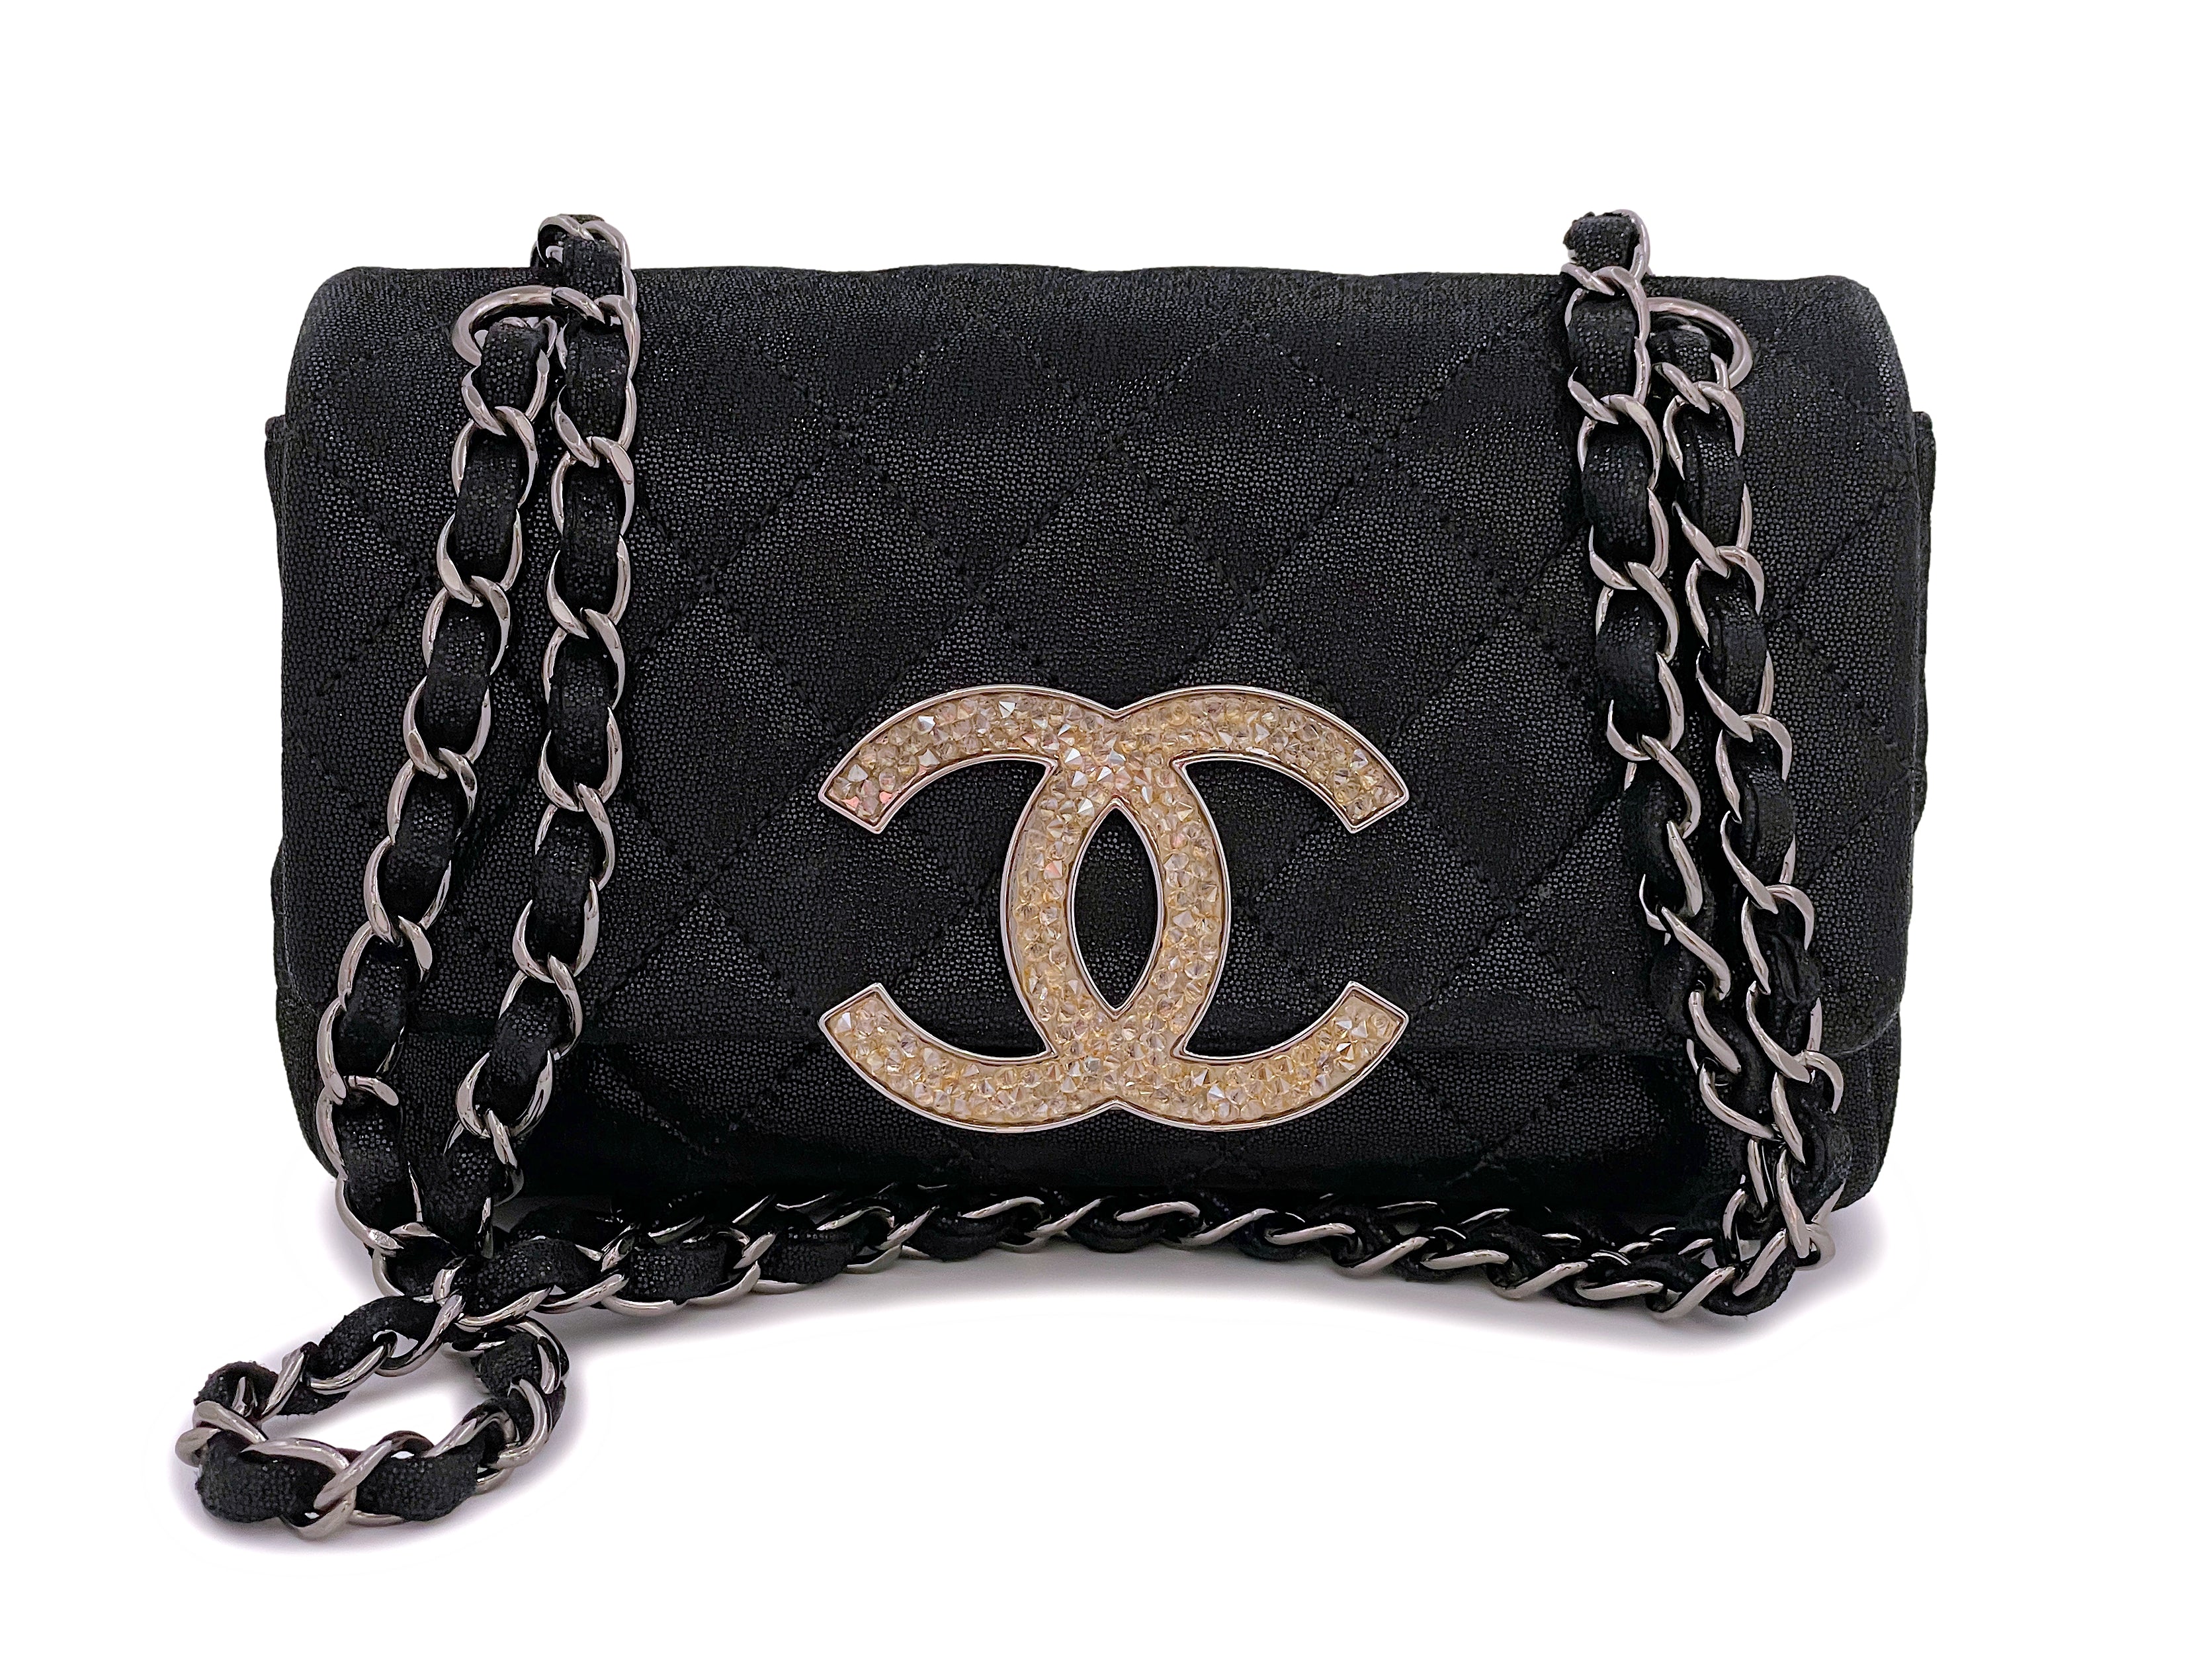 CHANEL - CC Strass Champagne Patent Leather - WOC Wallet on Chain Crossbody